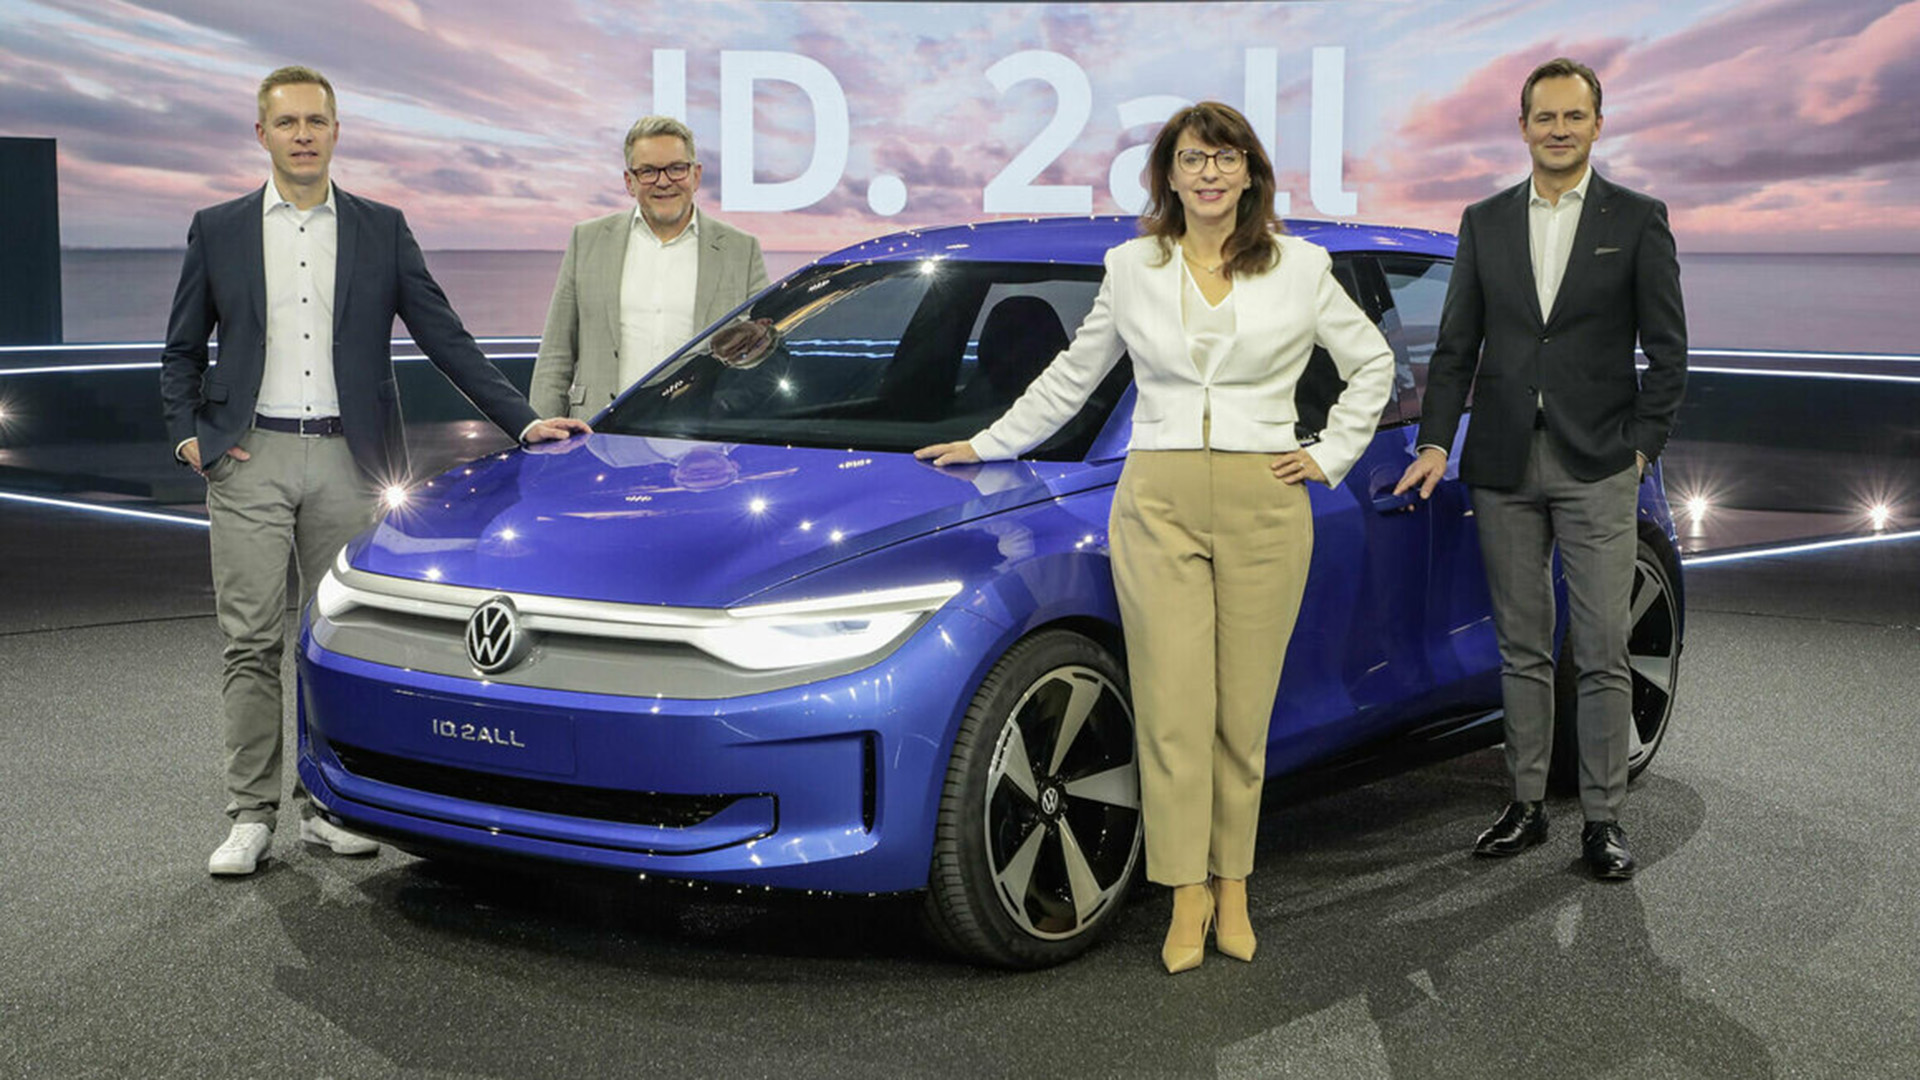 VW aims to produce 3 mln small EV cars in 2025-2030 in Spain, SEAT